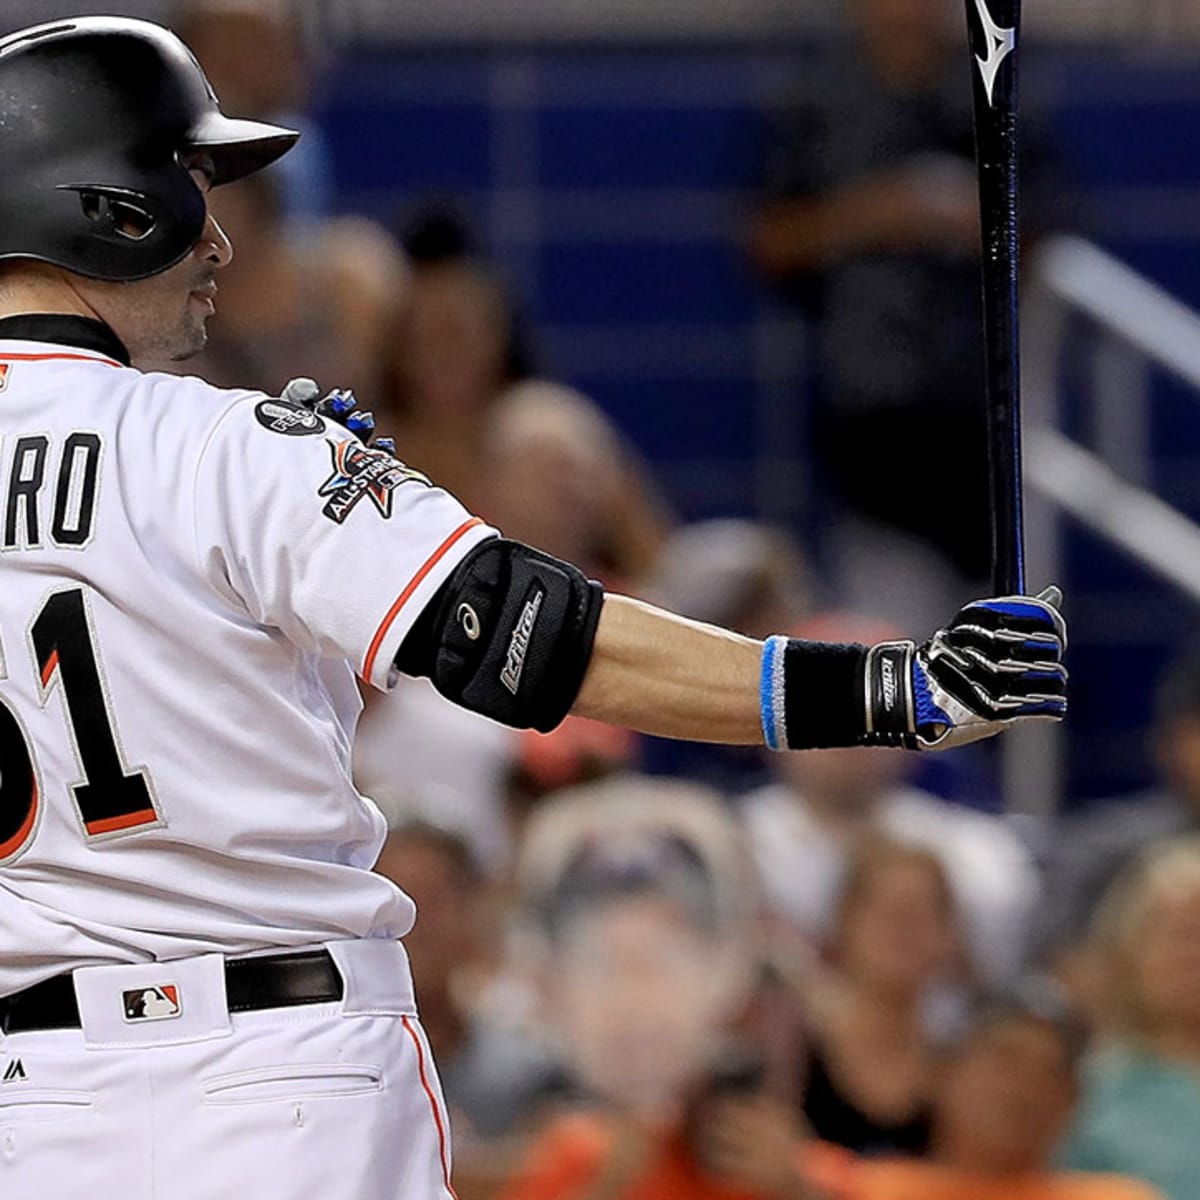 Marlins officially announce 1-year, $2 million deal with Ichiro